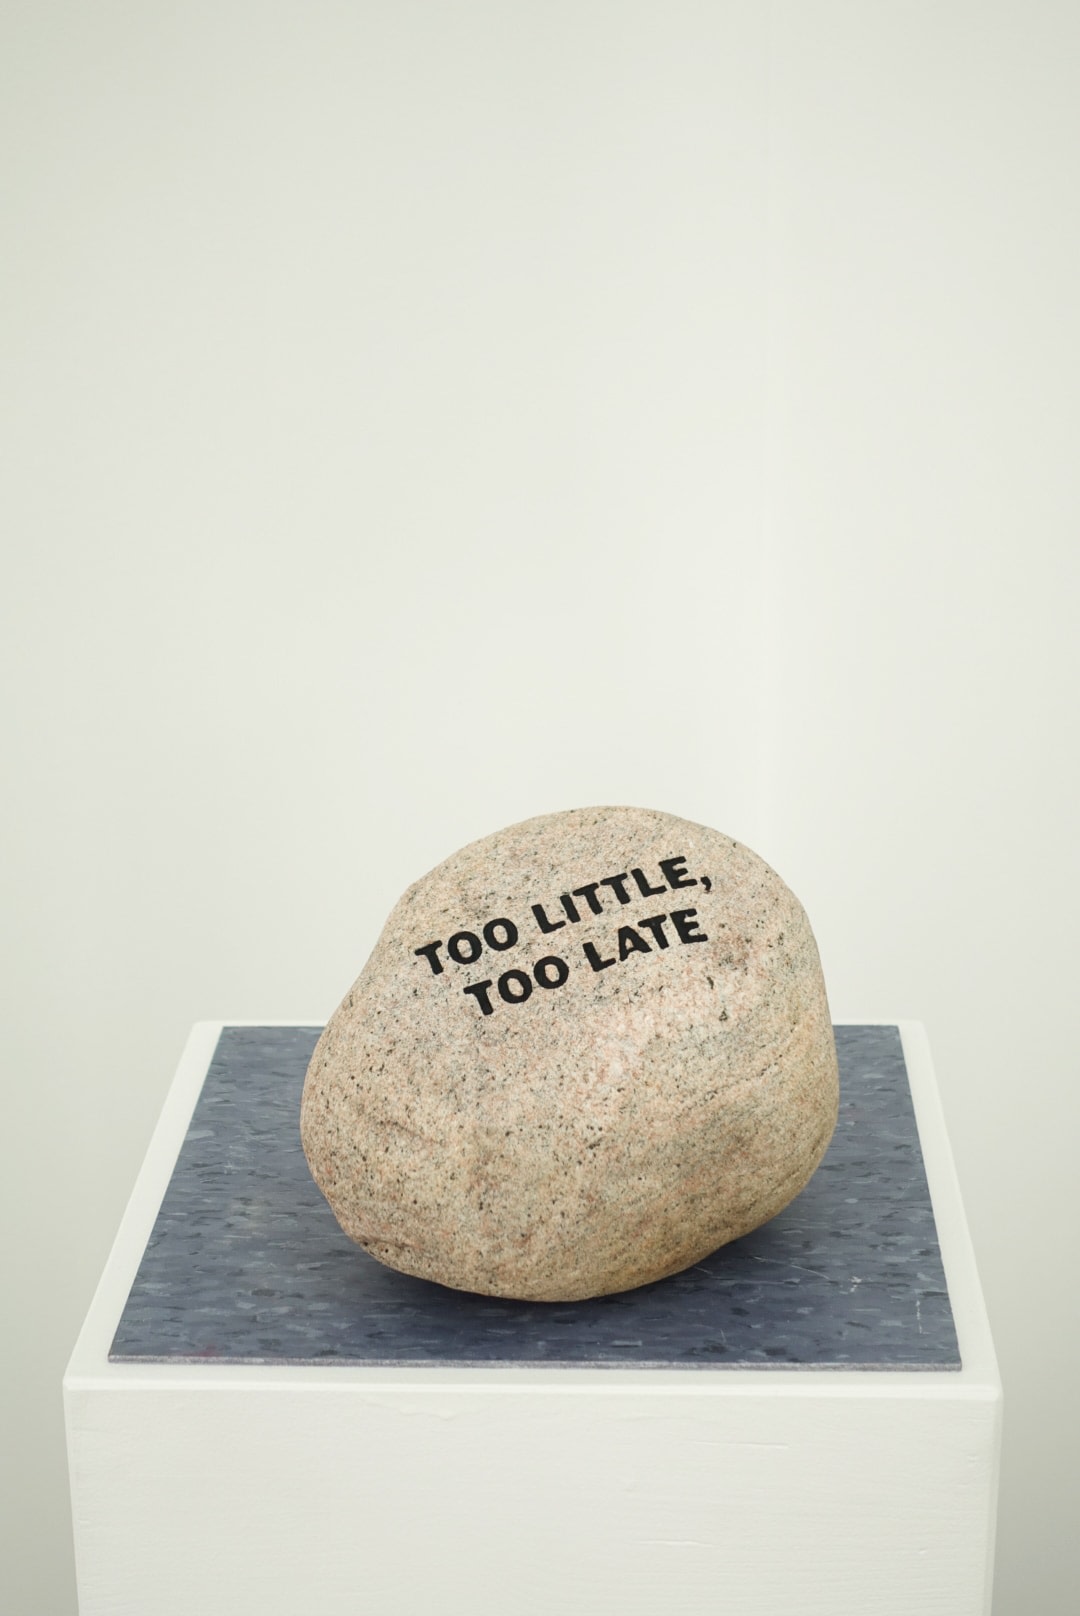 MICHAEL VICKERS | MONUMENT V&nbsp;(LATE)&nbsp;| ENGRAVED AND PAINTED STONE BOULDER | 6&nbsp;X 8 X&nbsp;9 INCHES&nbsp;| 2017